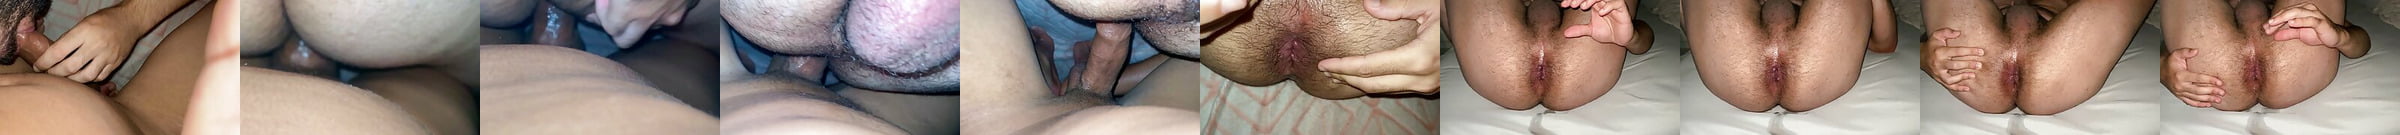 Breed Me Again And Again Free Gay Anal Breeding Porn 7a Xhamster